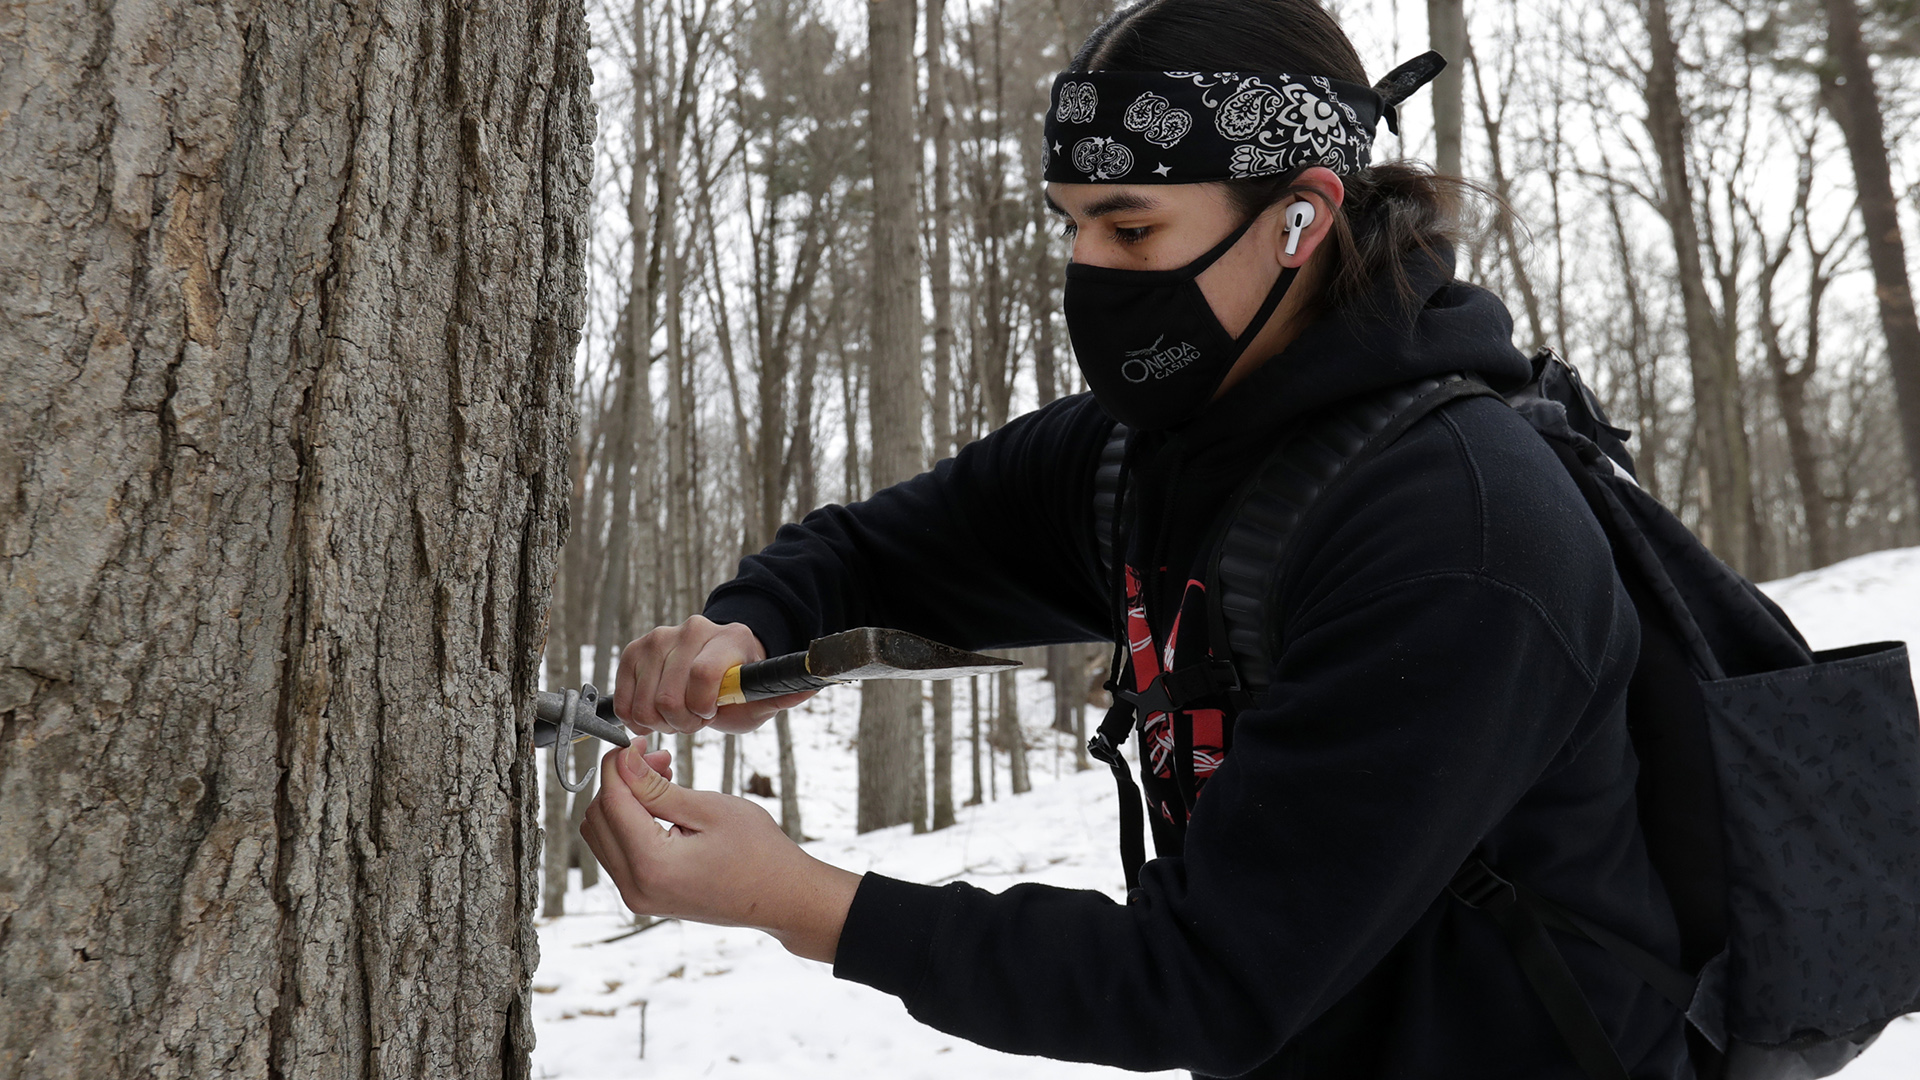 Dustin Elm stands next to a tree in a snow covered forest and collects sap.